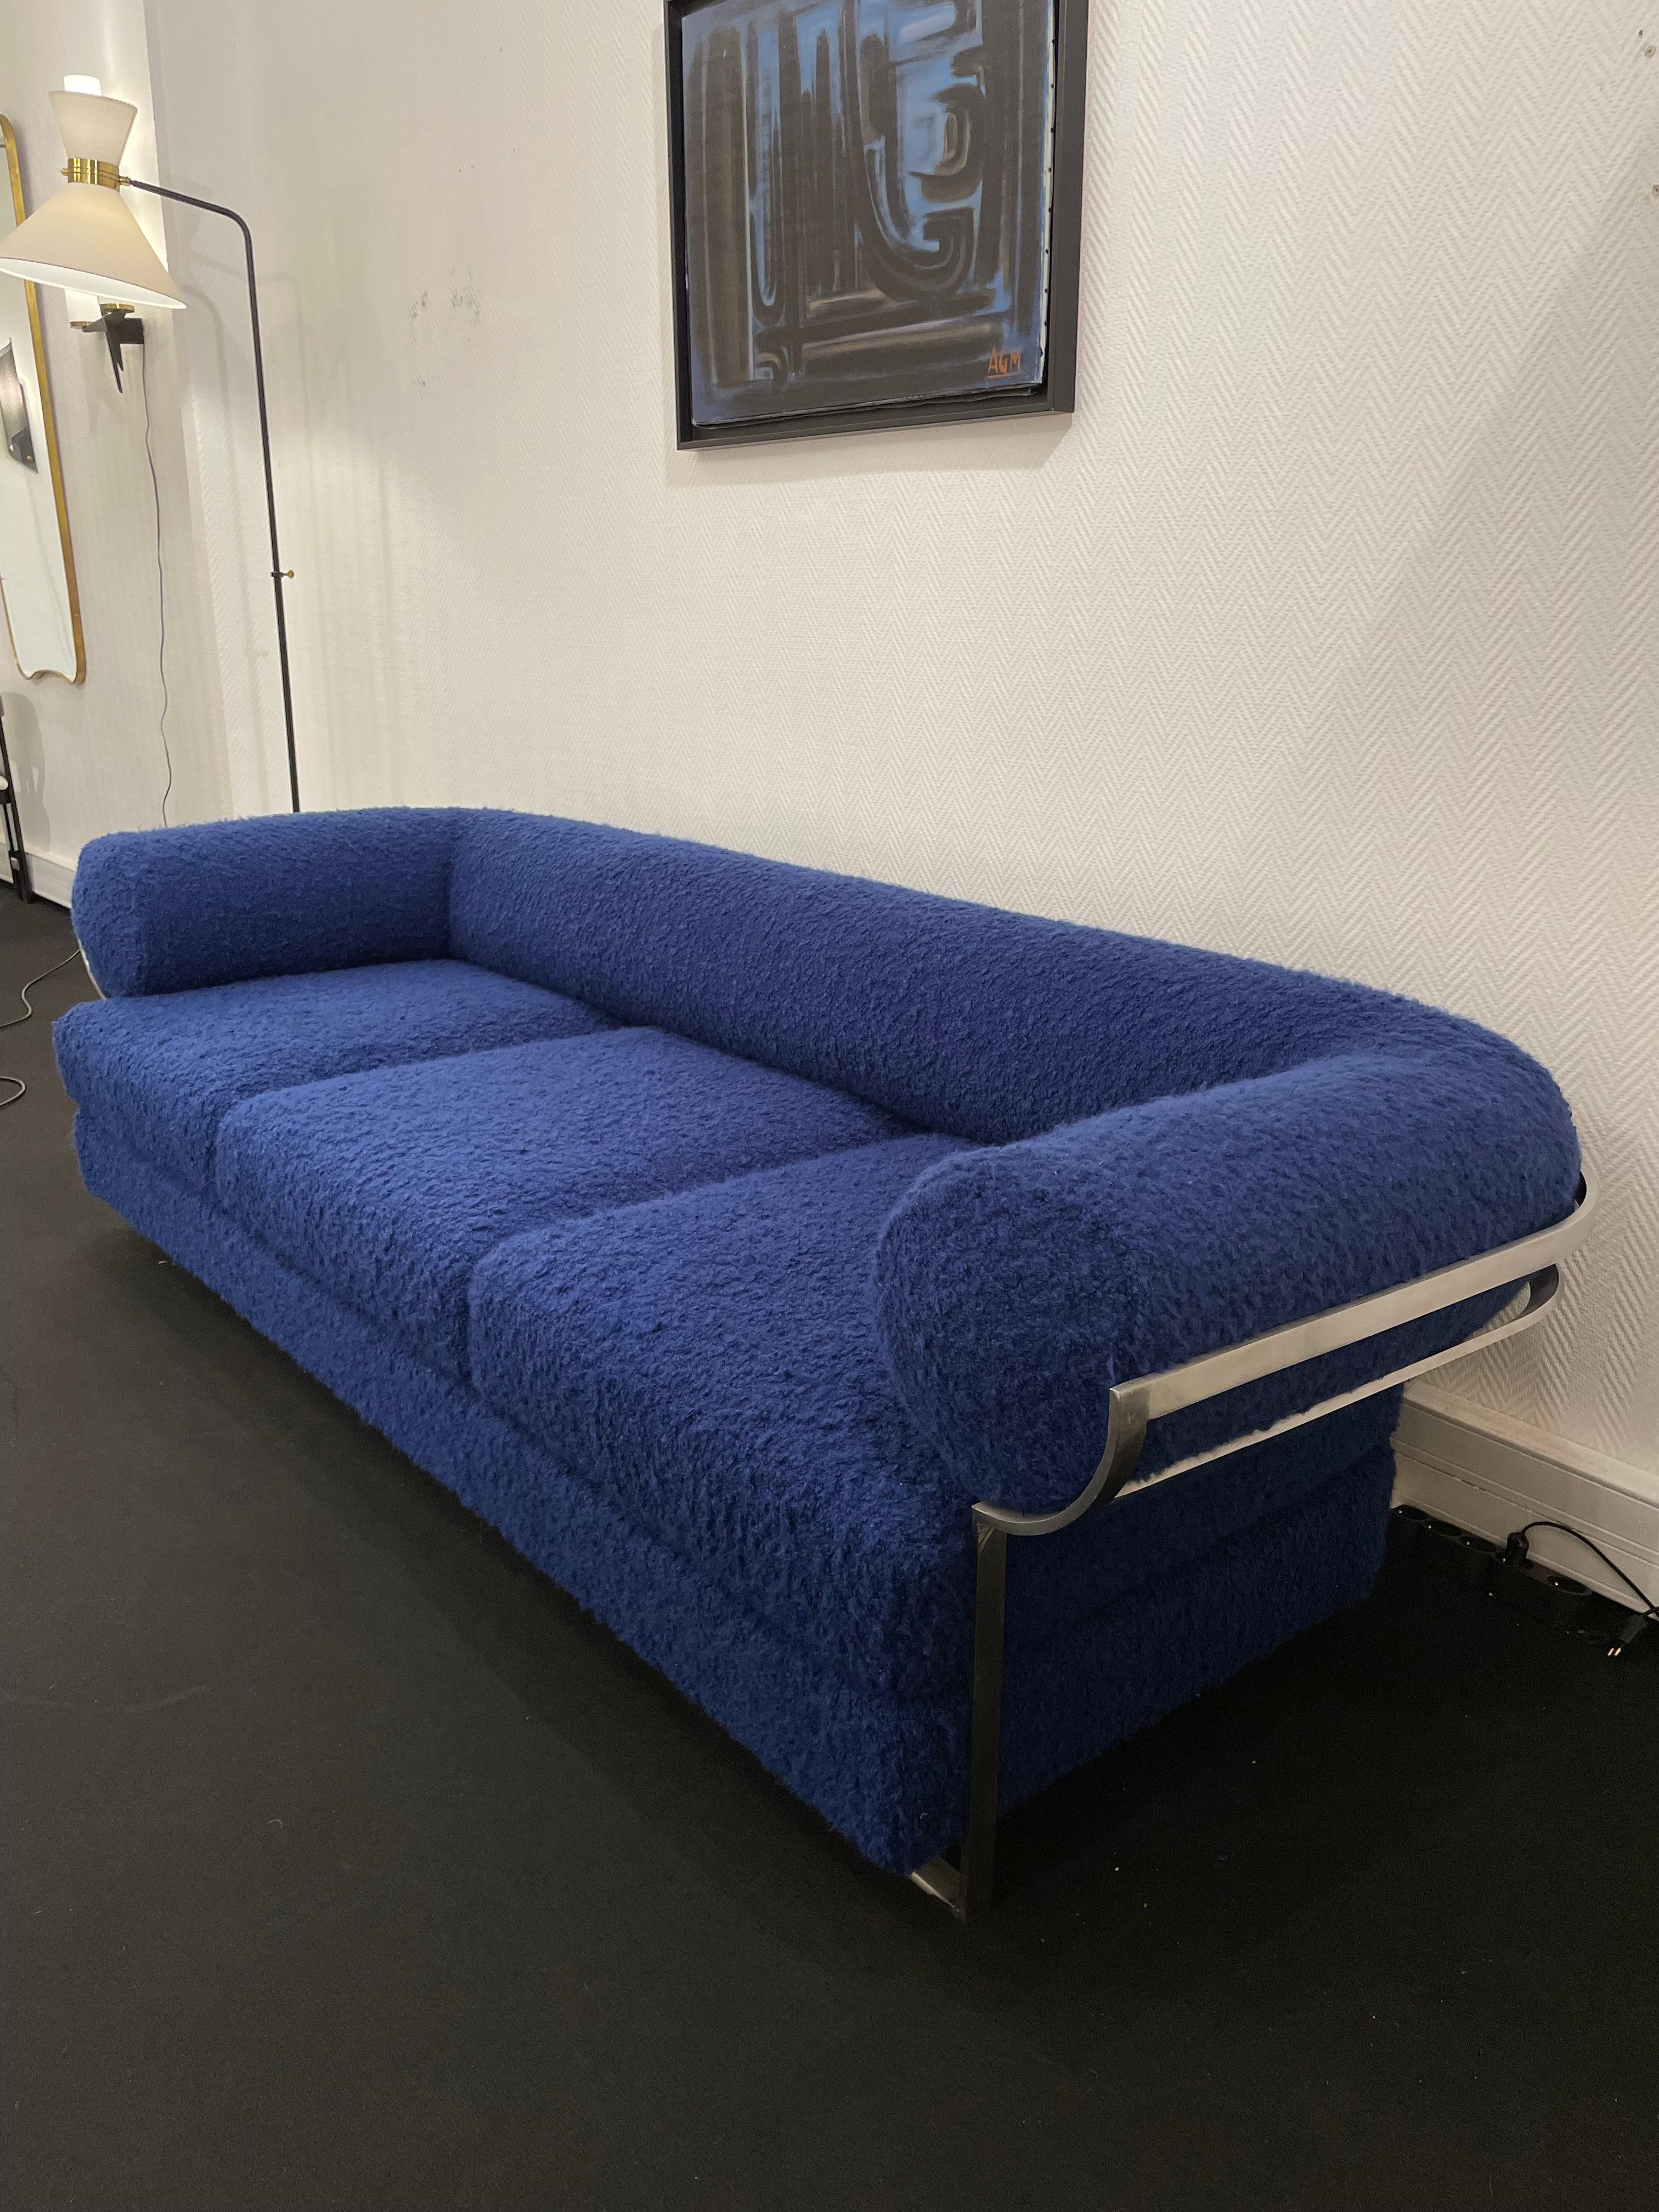 Sofa Apollo by Jacques Charpentier from 70 
Metal and fabric Pierre Frey.